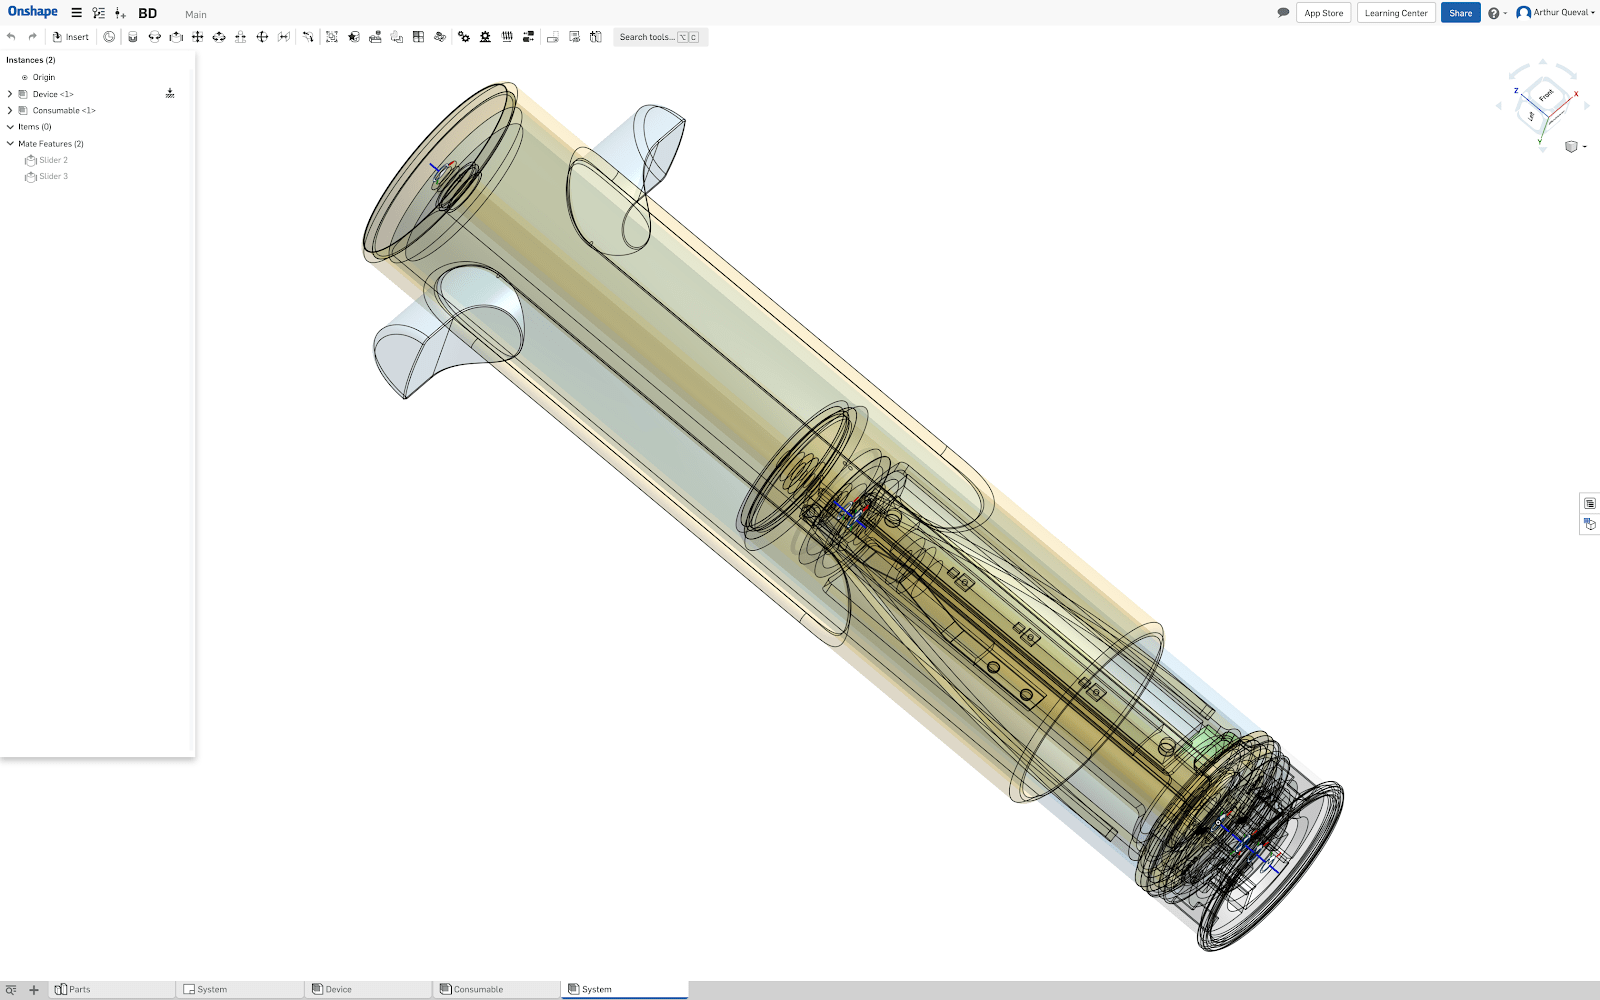 Onshape screenshot of the CAD model of Loop Medical's new needle-free blood collection device, which is scheduled for clinical trials in 2020.